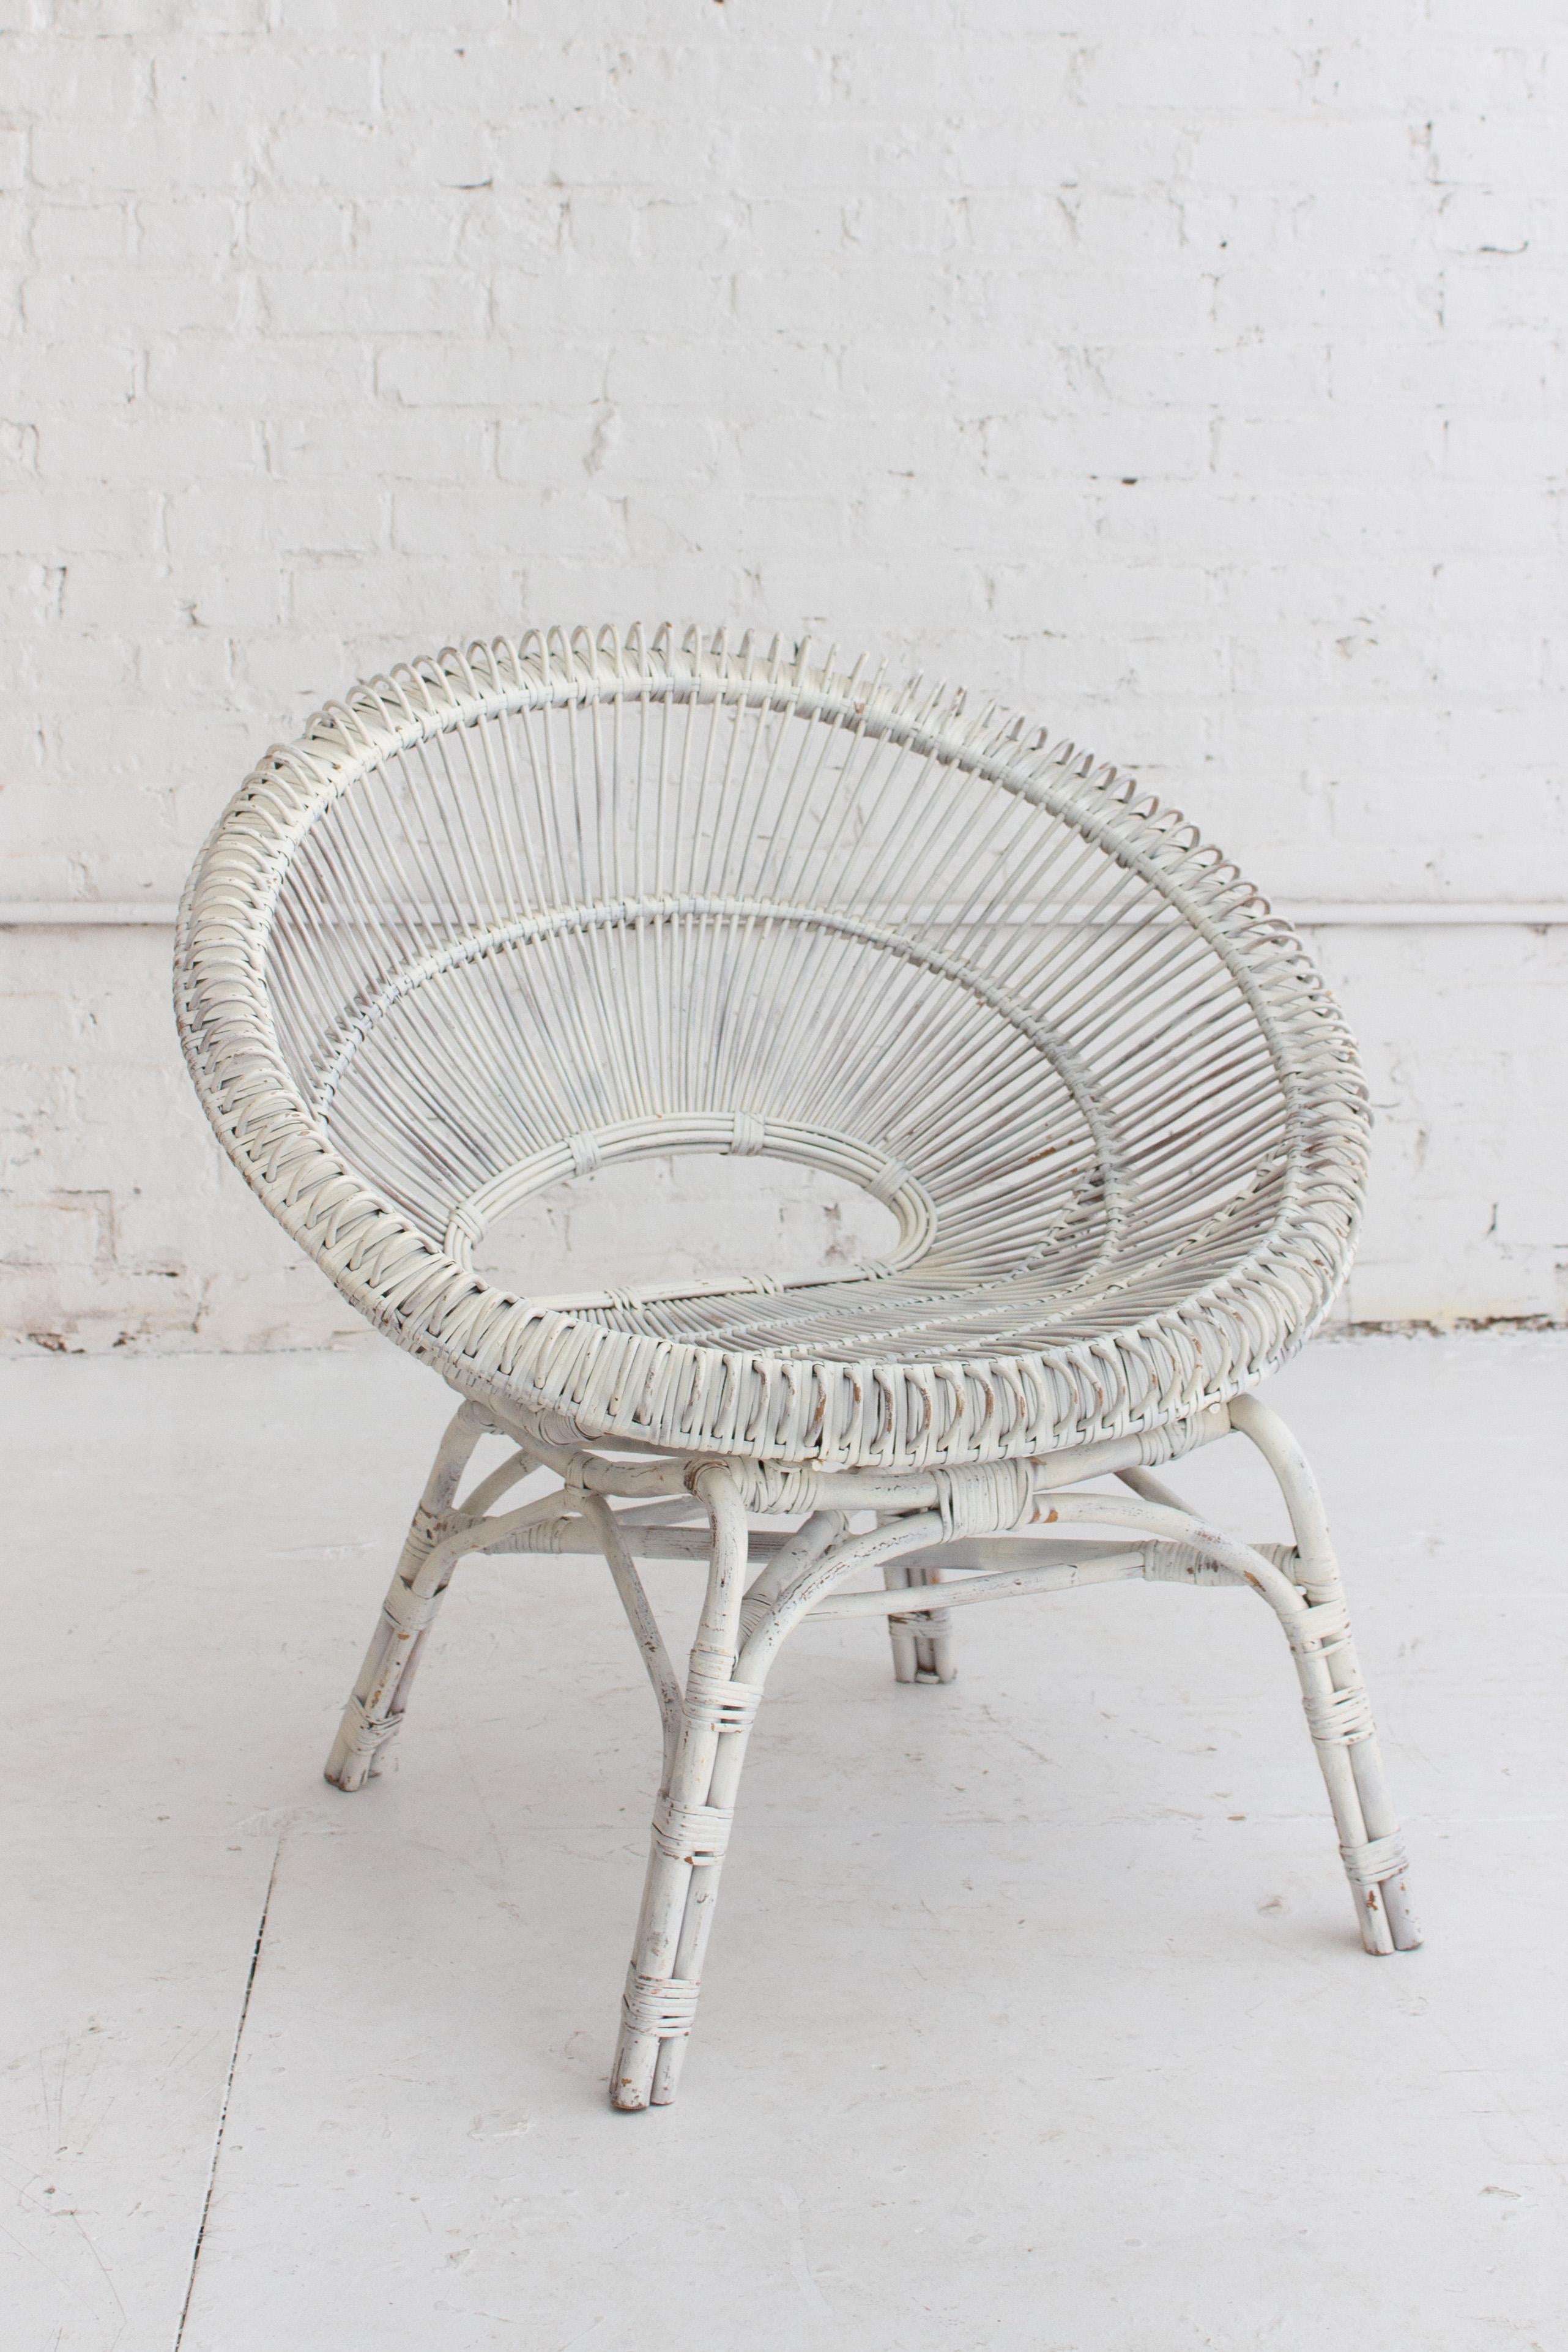 A midcentury French rattan chair. Circular Silhouette. White paint has chipped and patinaed with age.